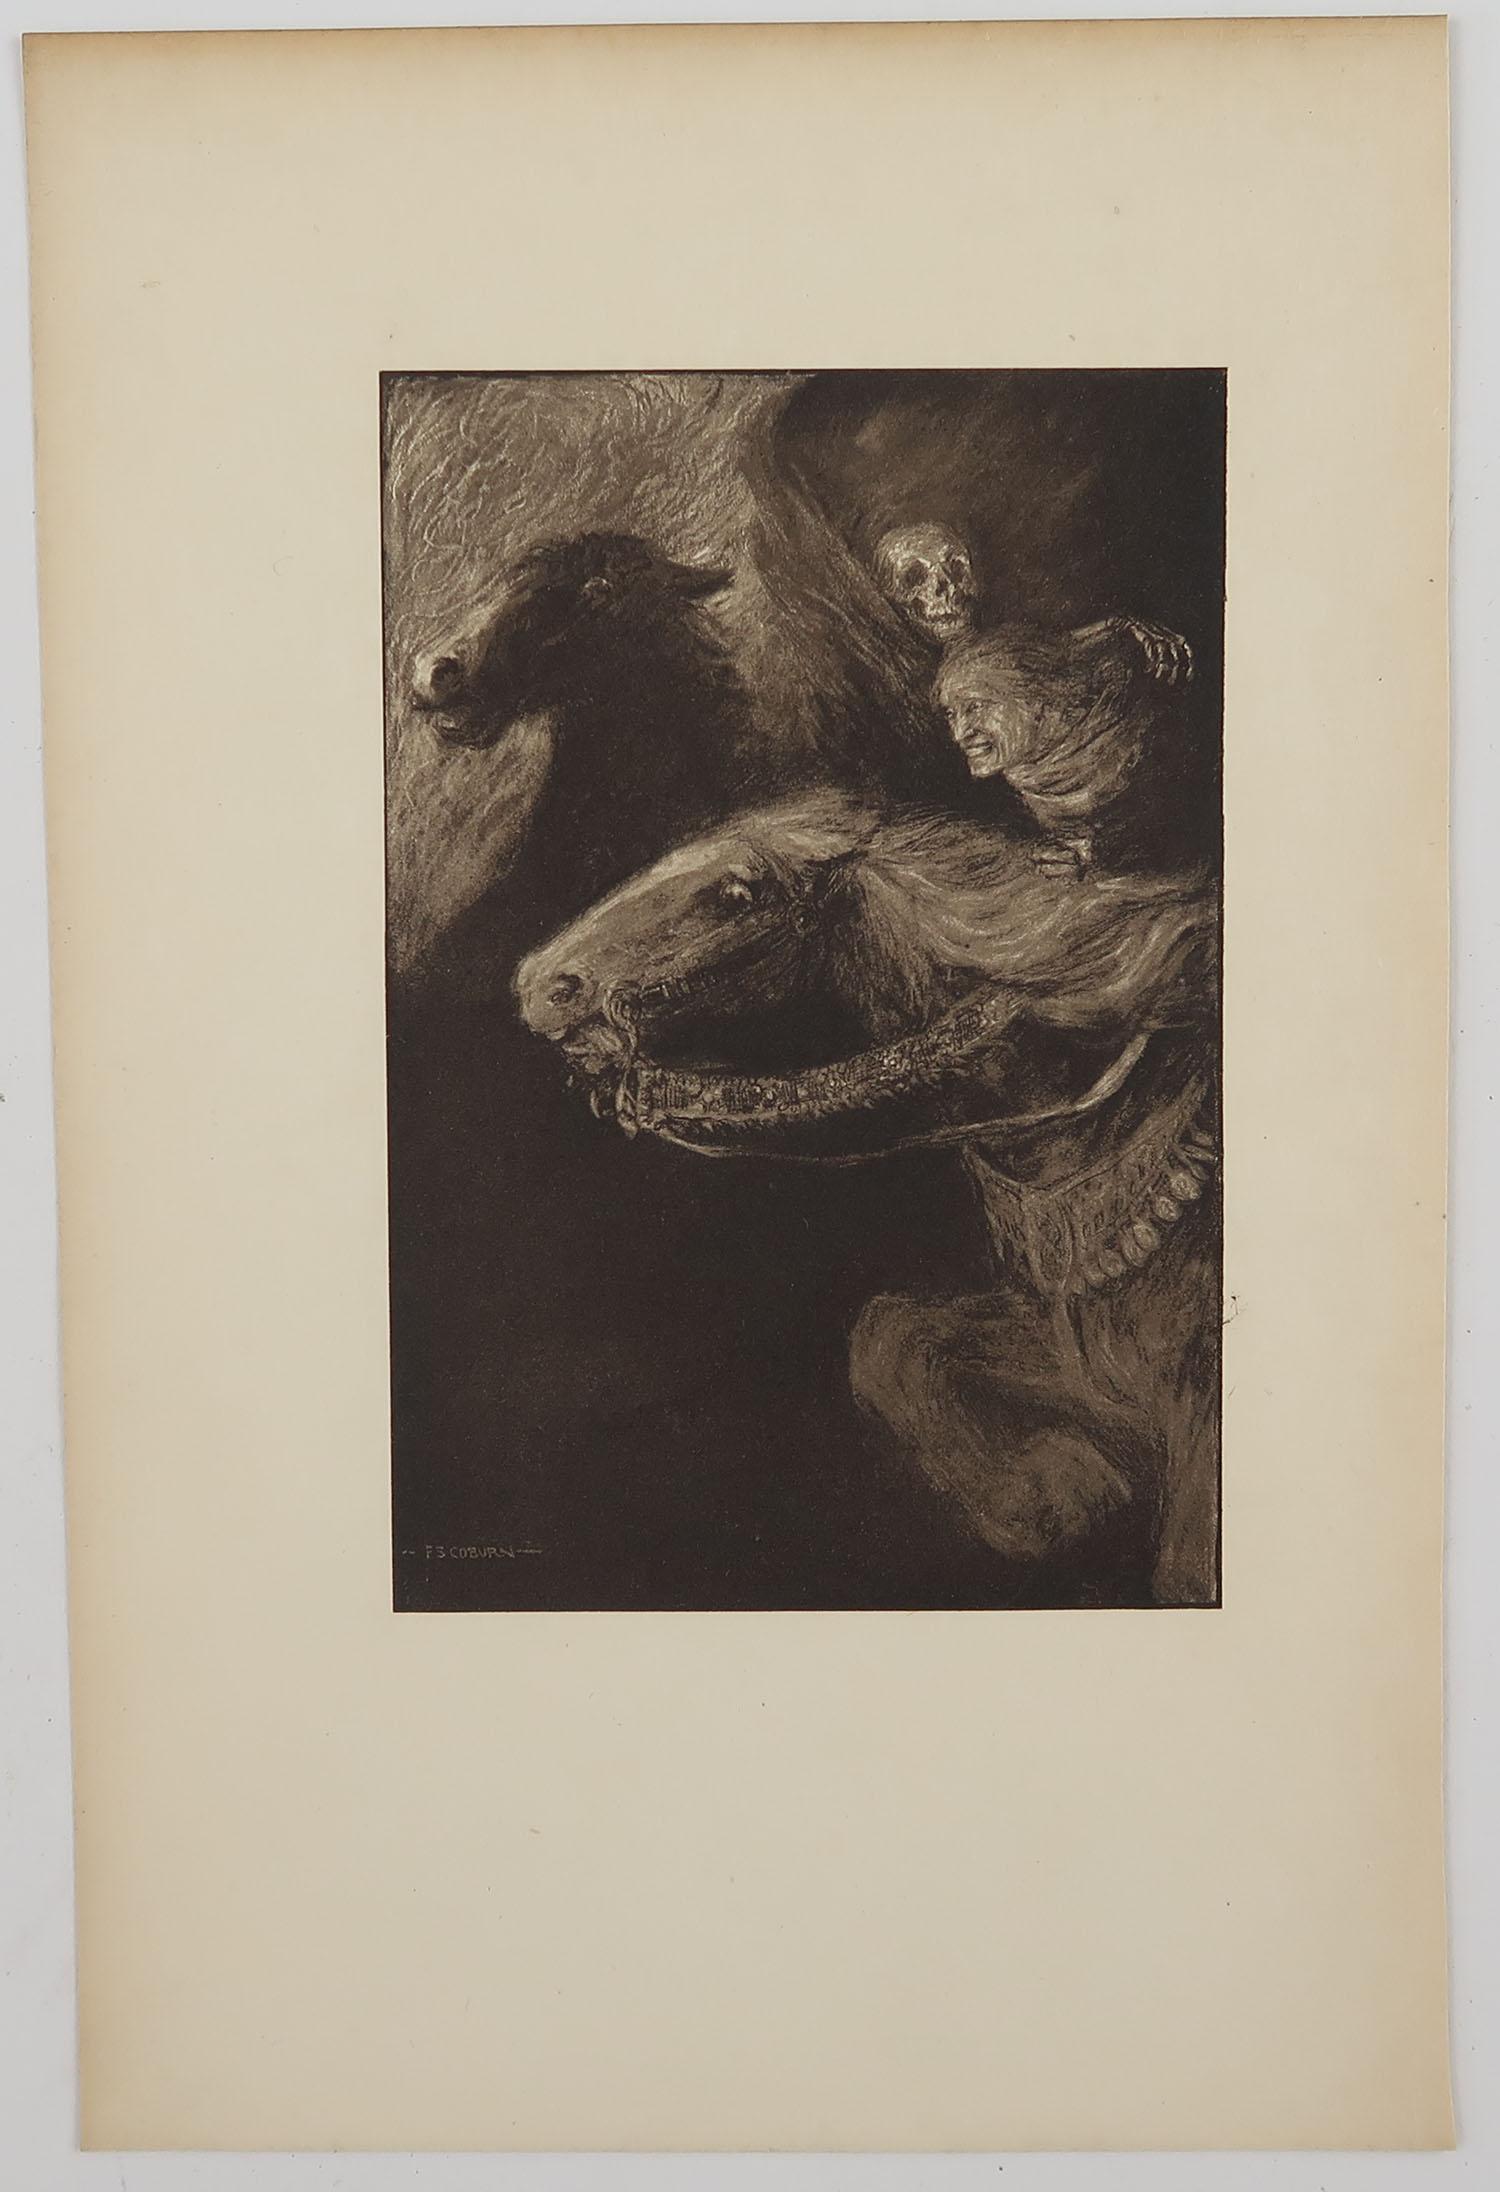 Sensational image by Frederick Simpson Coburn

In the style of one of my favourite artists, Goya

Photogravure

Limited edition of 300. This is No. 84

From The Complete Works of Edgar Allen Poe

Published by Putnam, New York. 1902

On